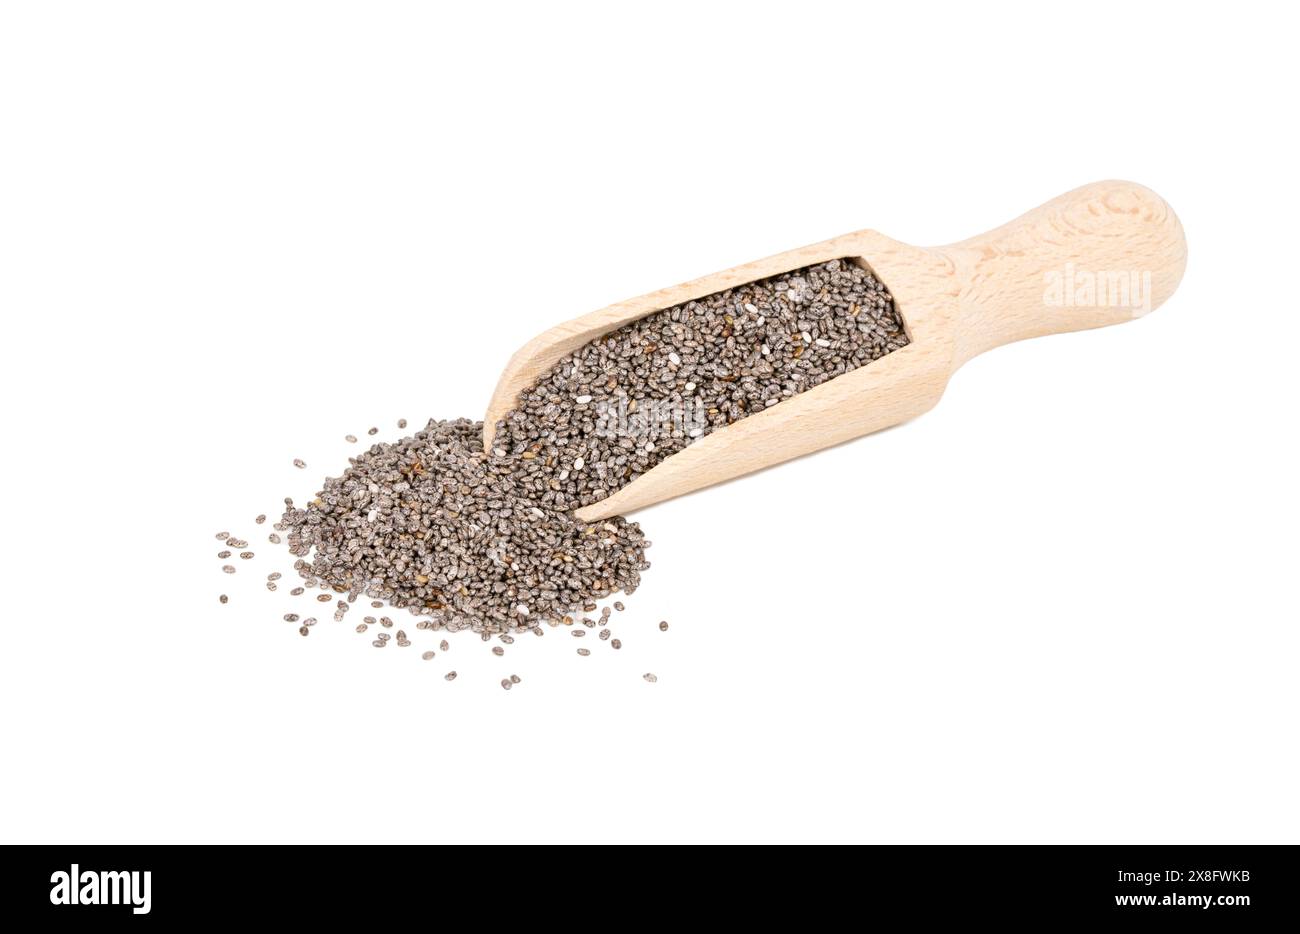 Chia seeds in wooden scoop isolated on white background Stock Photo